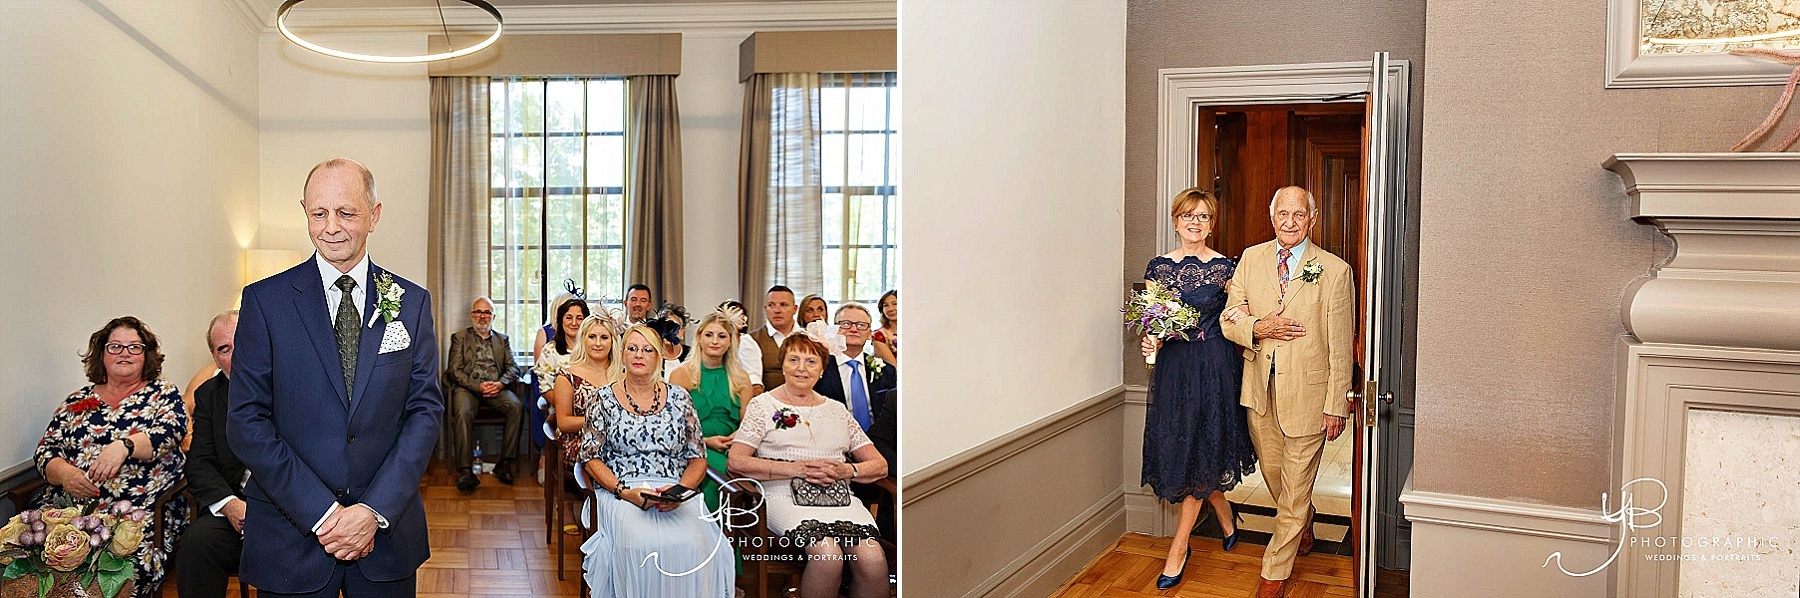 Bride Christine wears a navy lace dress for her Mayfair Room wedding to Ray in front of family and friends. 